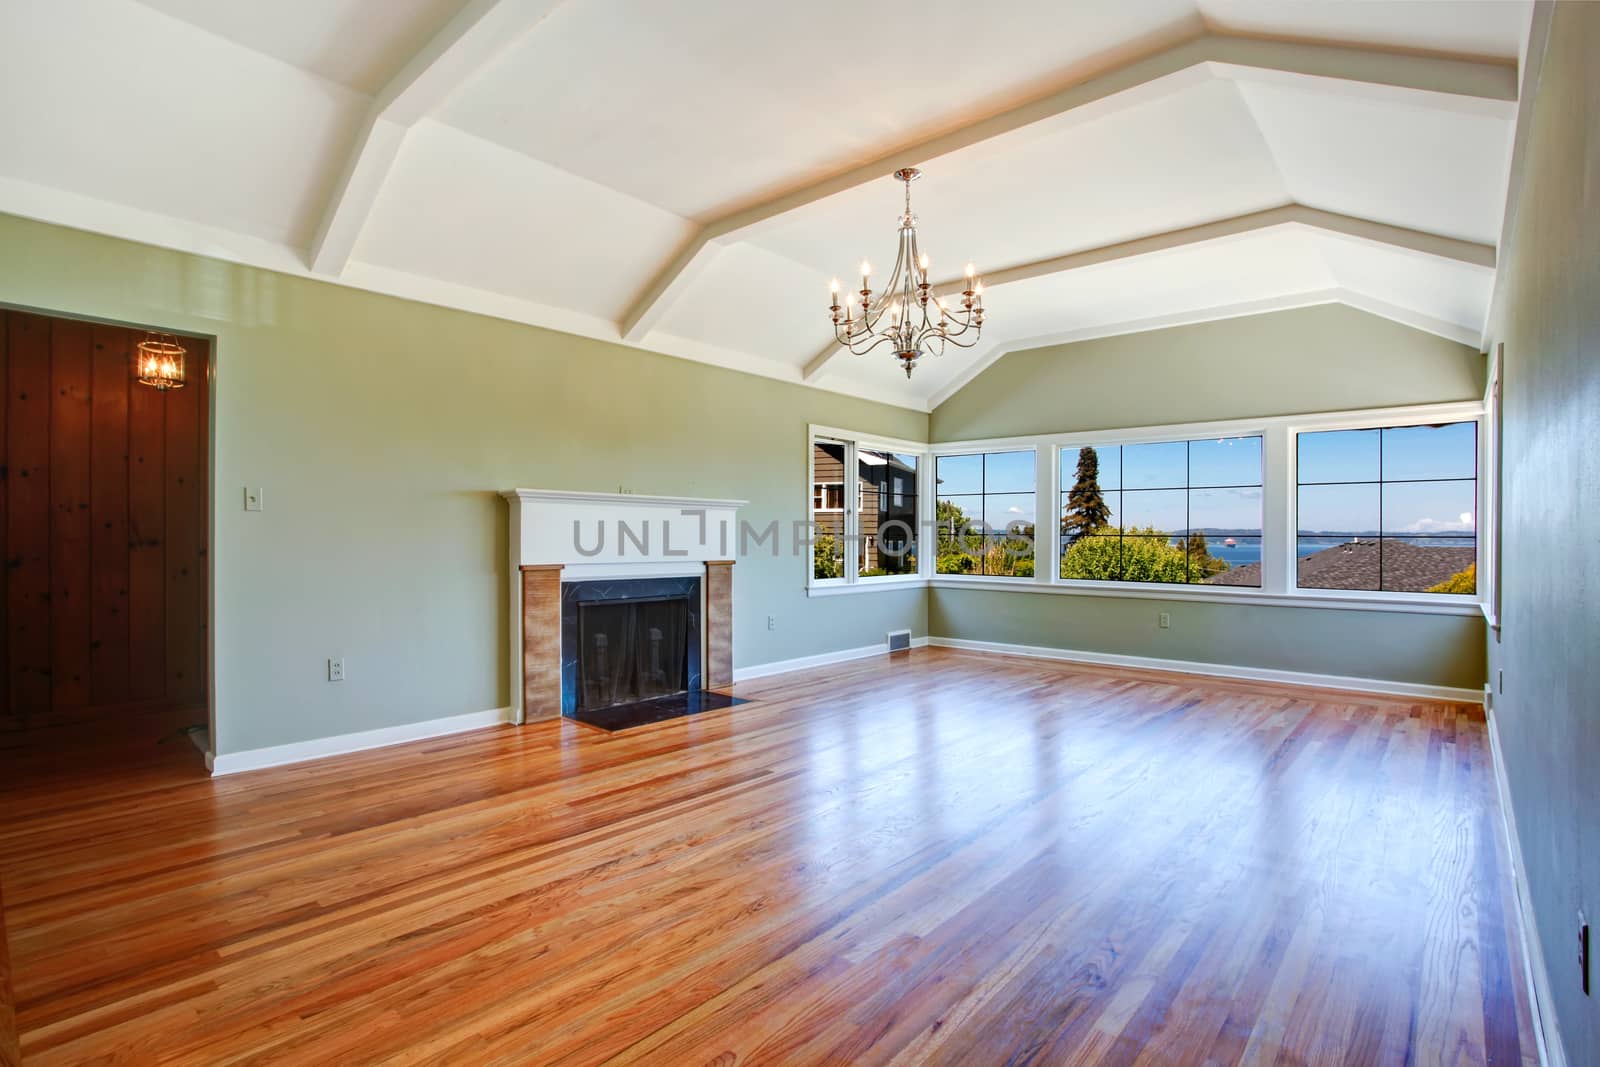 Empty specious living room interior with vaulted ceiling, light mint walls, hardwood floor and fireplace. Room with bay view